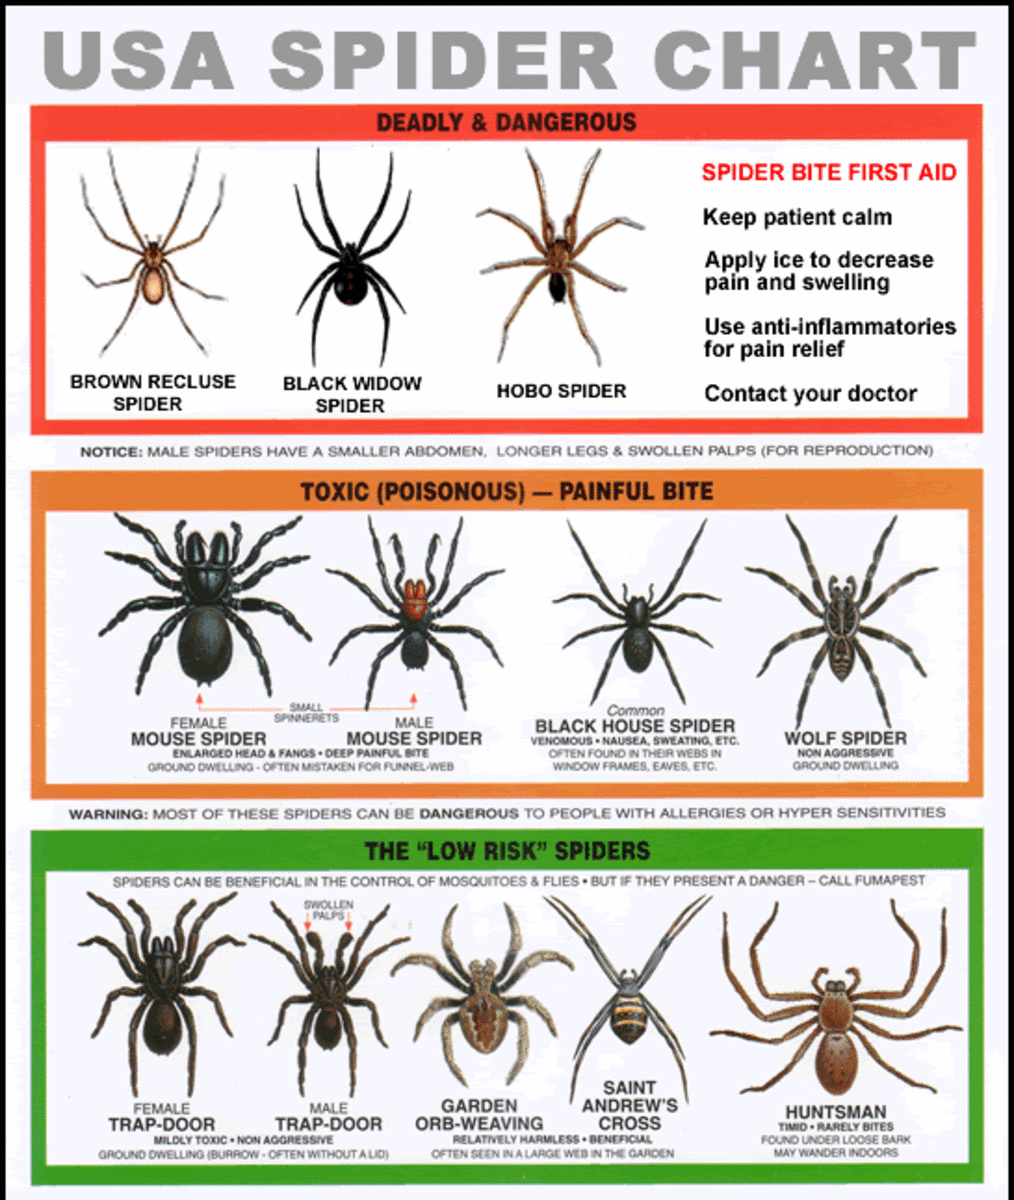 Are there any poisonous spiders in the United States?